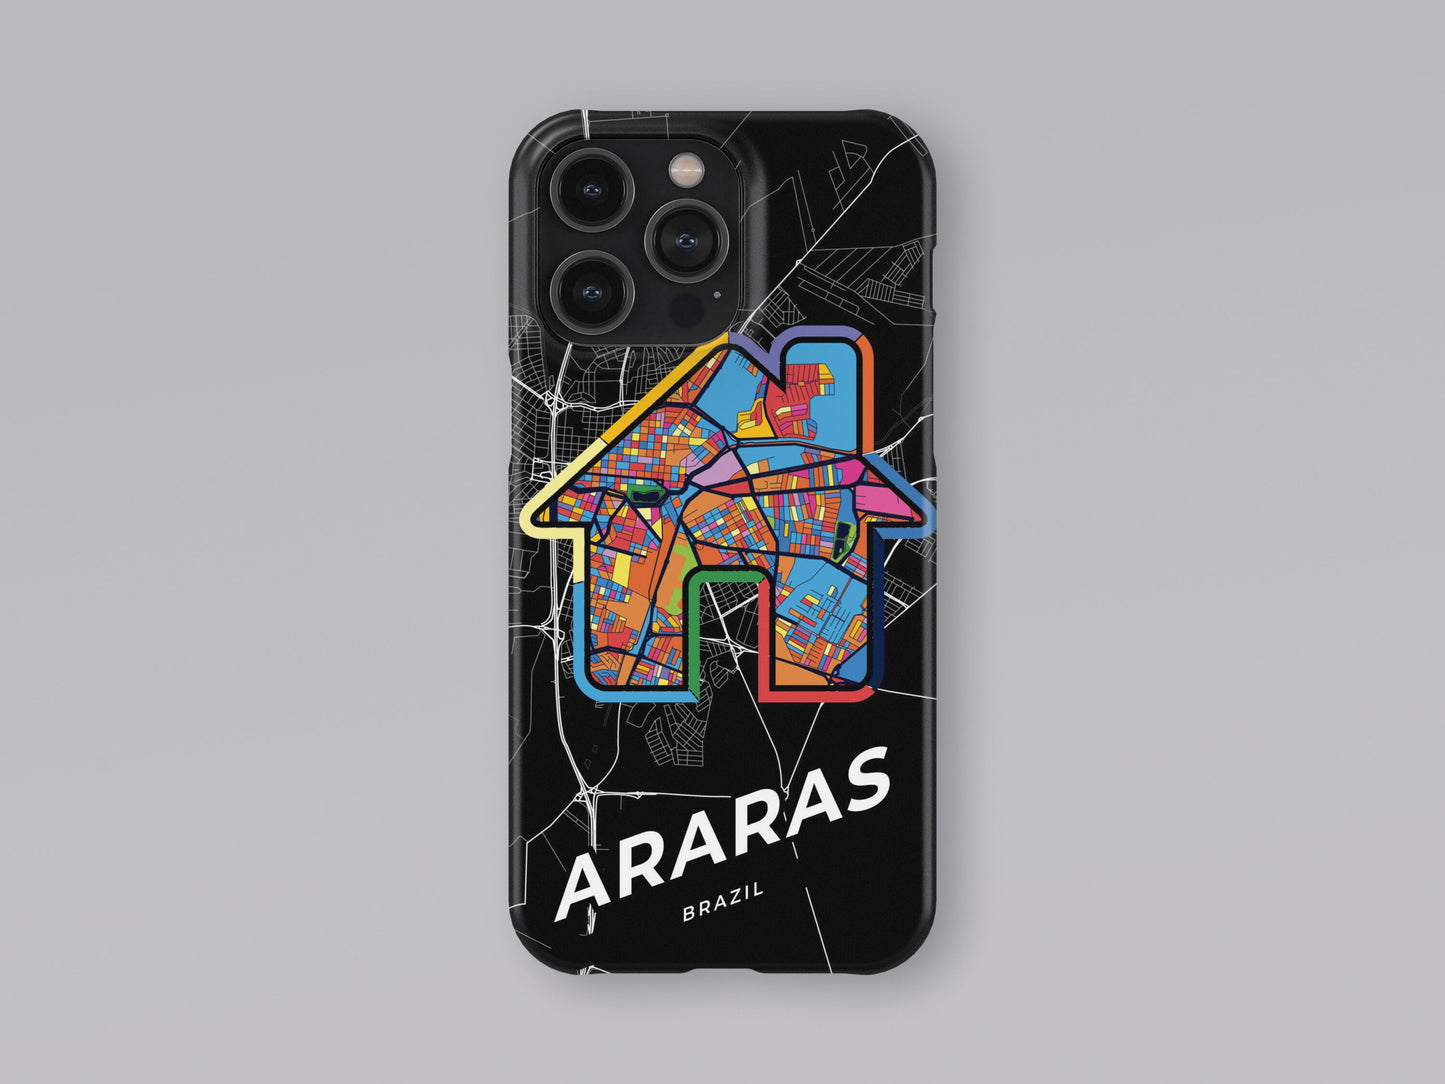 Araras Brazil slim phone case with colorful icon. Birthday, wedding or housewarming gift. Couple match cases. 3